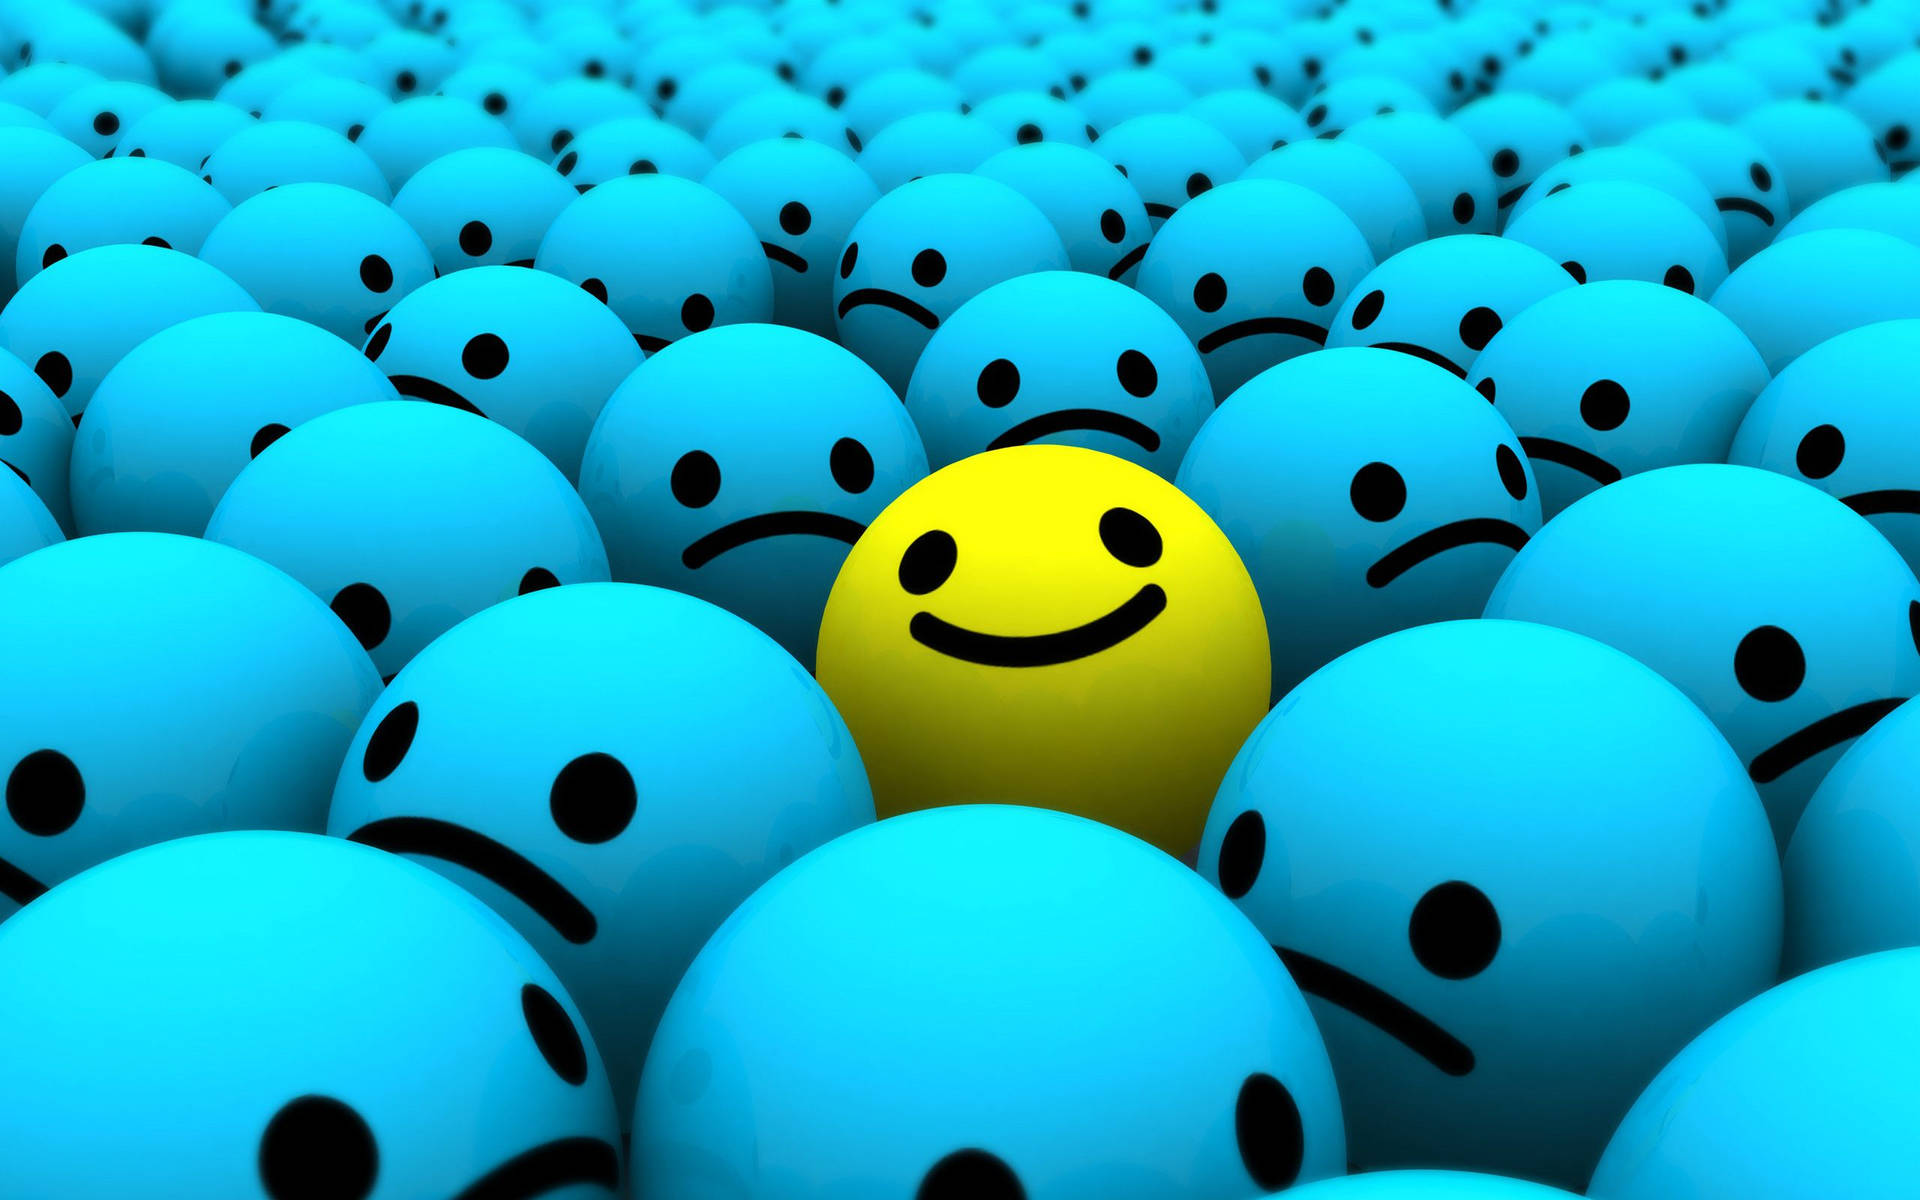 Smiley Face With Sad Faces Wallpaper